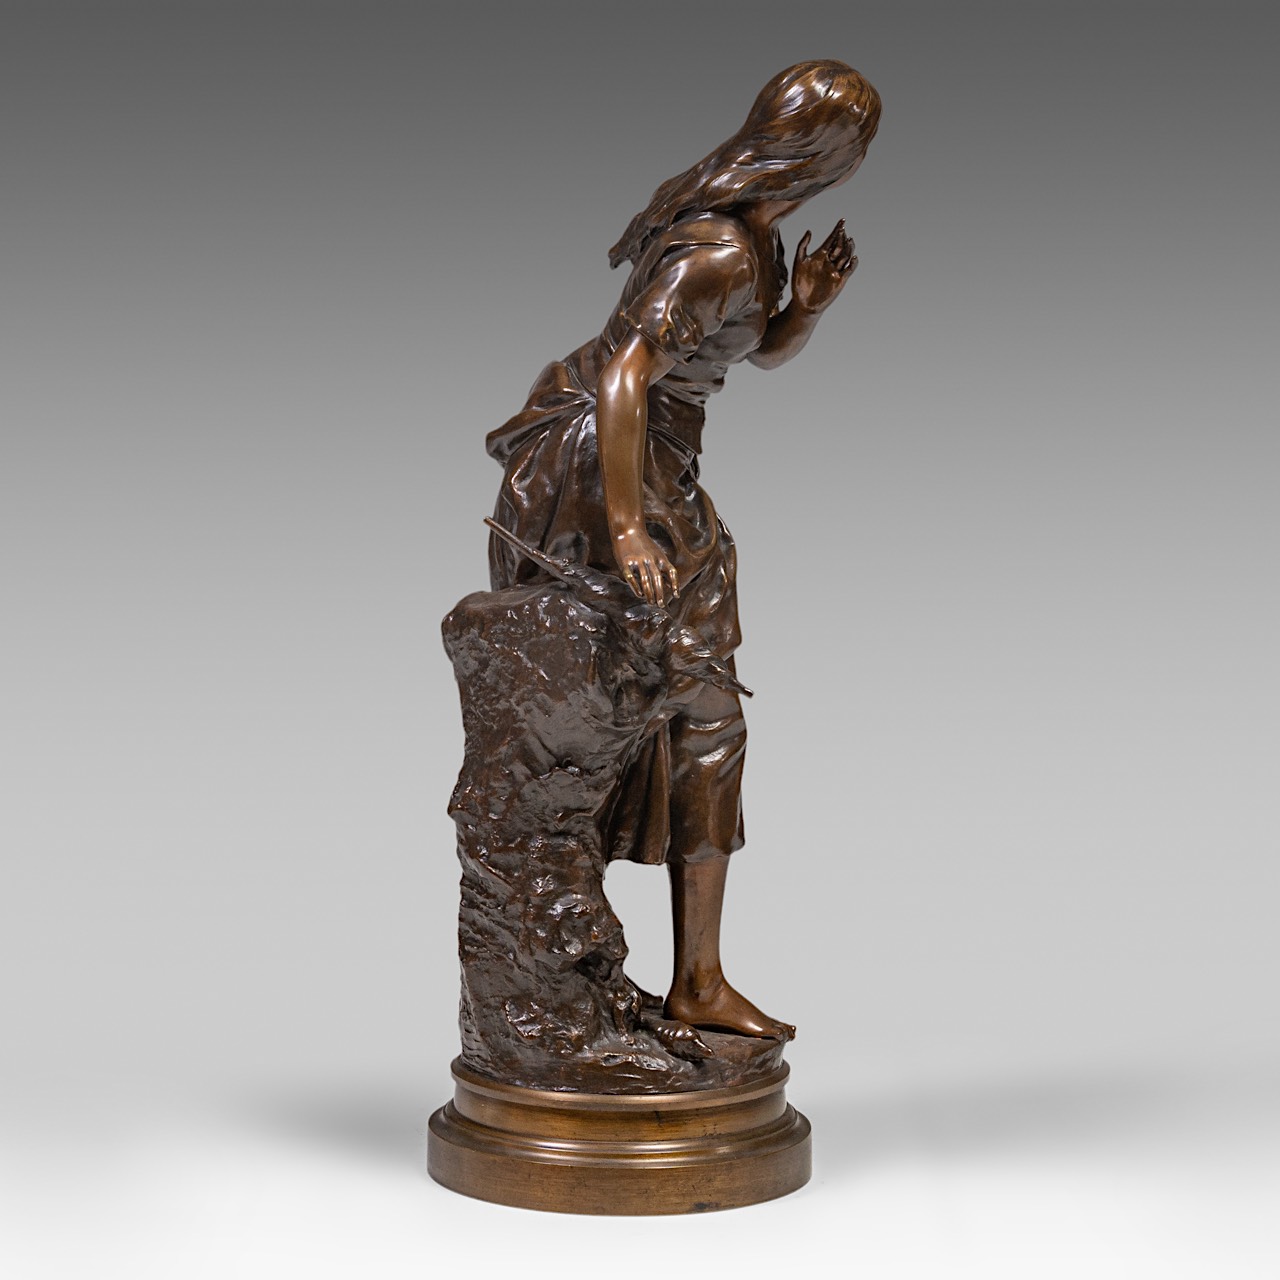 Mathurin Moreau (1822-1912), the spinner, patinated bronze, Hors Concours, H 89 cm - Image 5 of 8